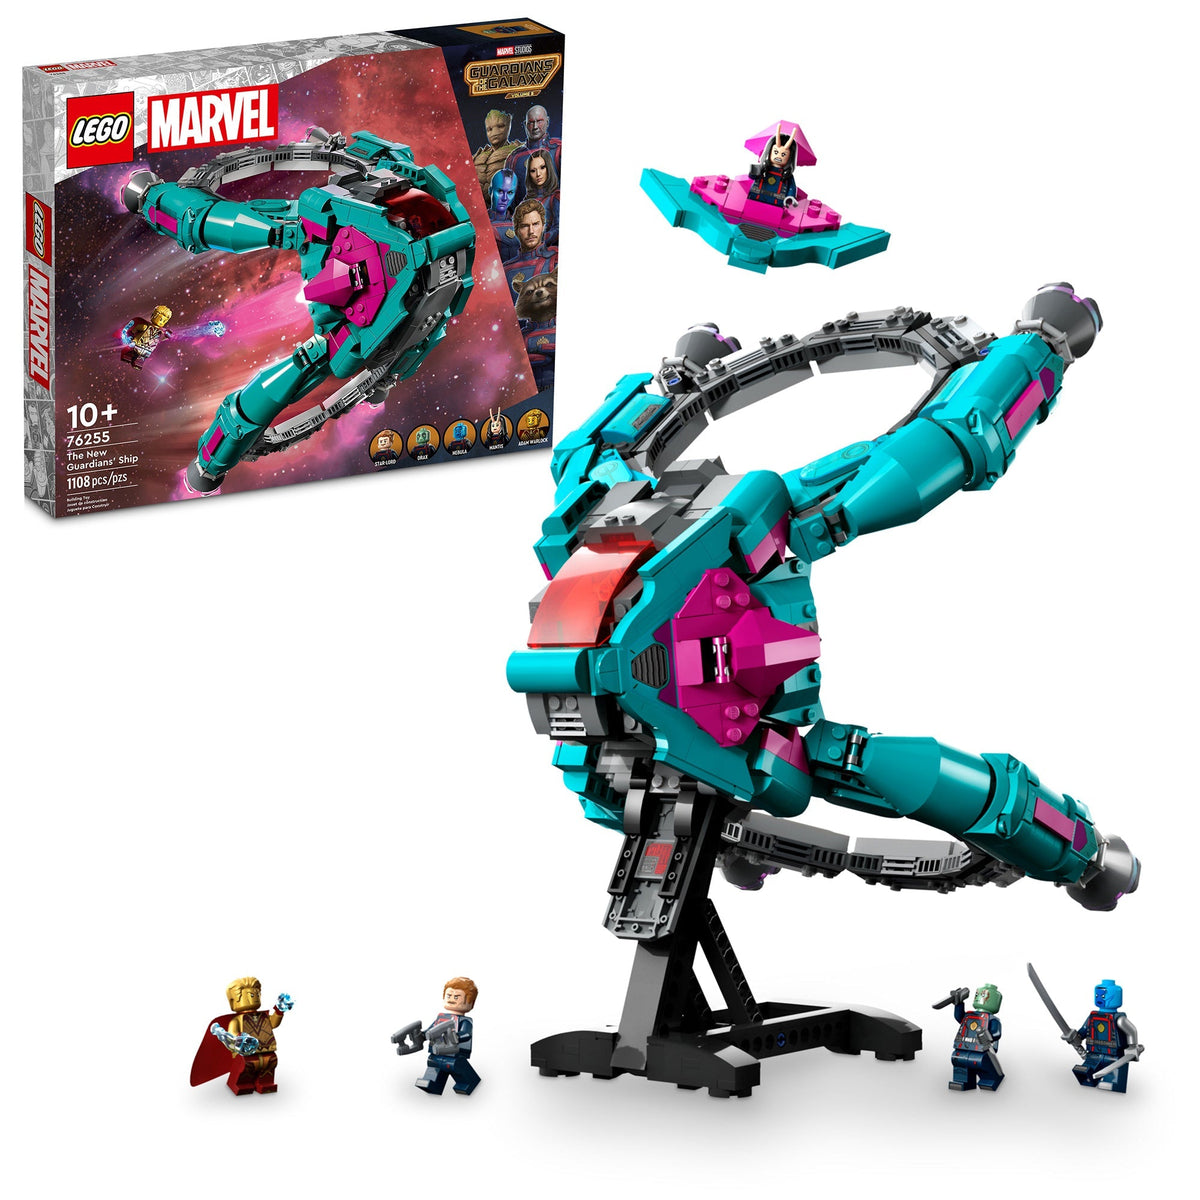 LEGO Toys & Games LEGO Marvel The New Guardians' Ship, 76255, Ages 10+, 1108 Pieces